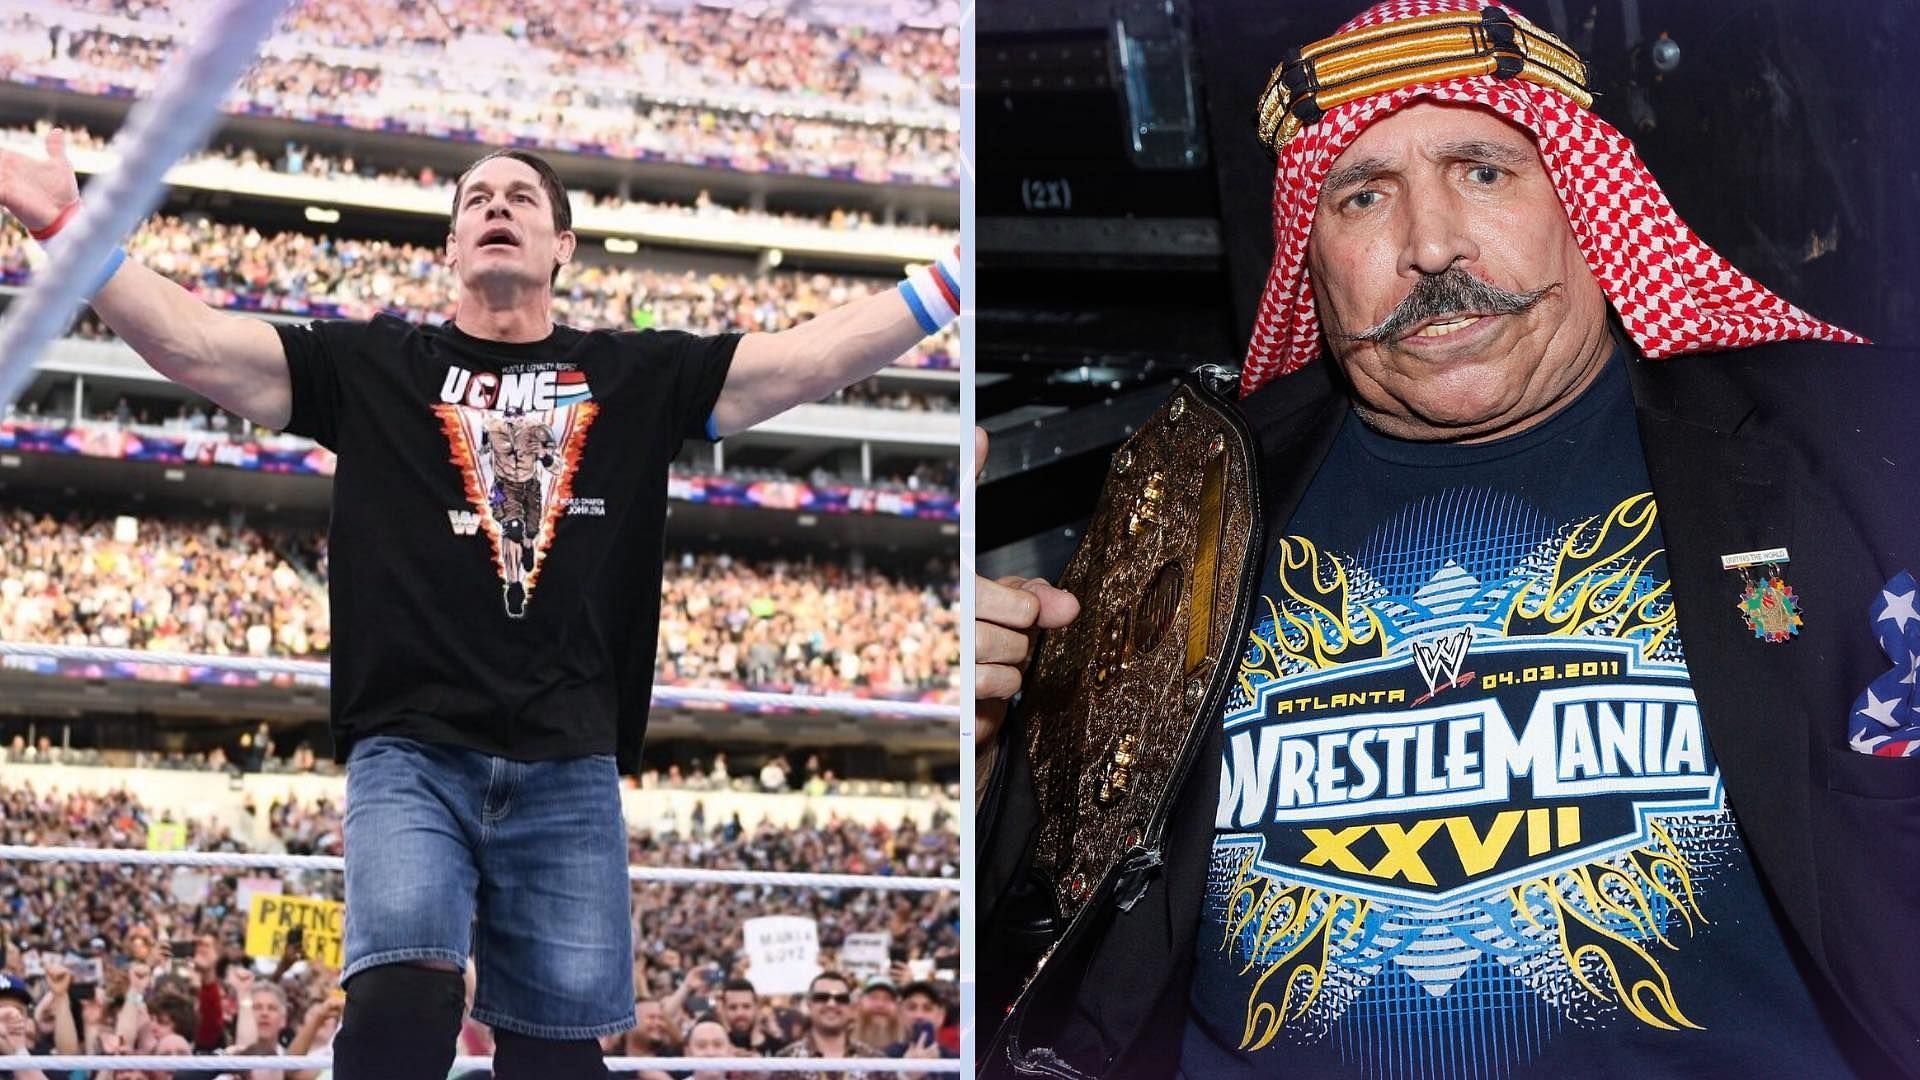 The Iron Sheik is a WWE Hall of Famer